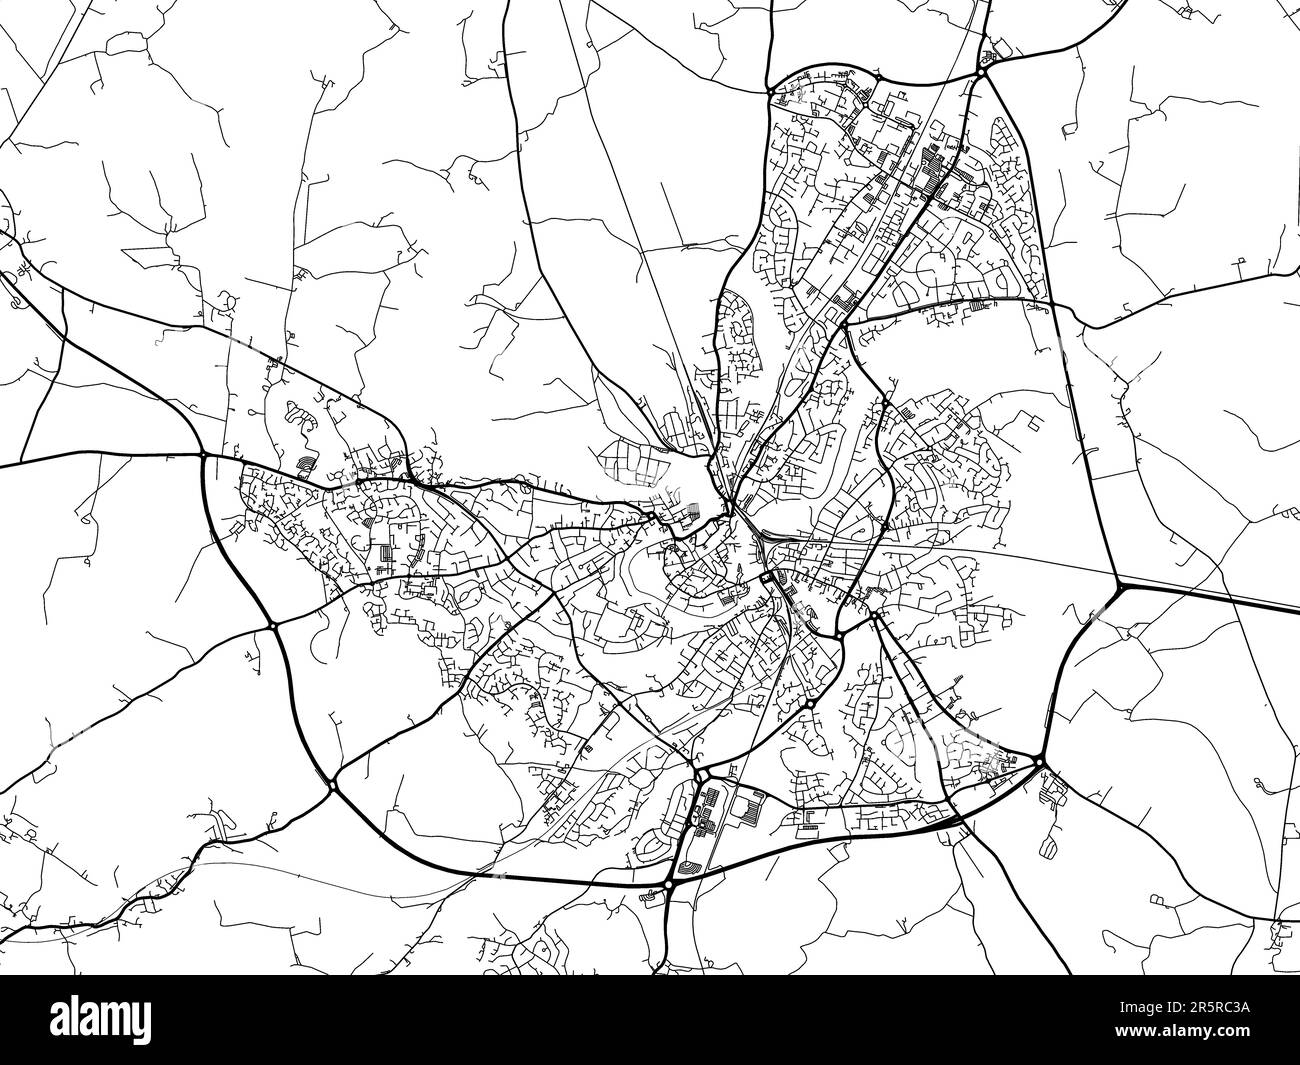 Road map of the city of Shrewsbury in the United Kingdom on a white ...